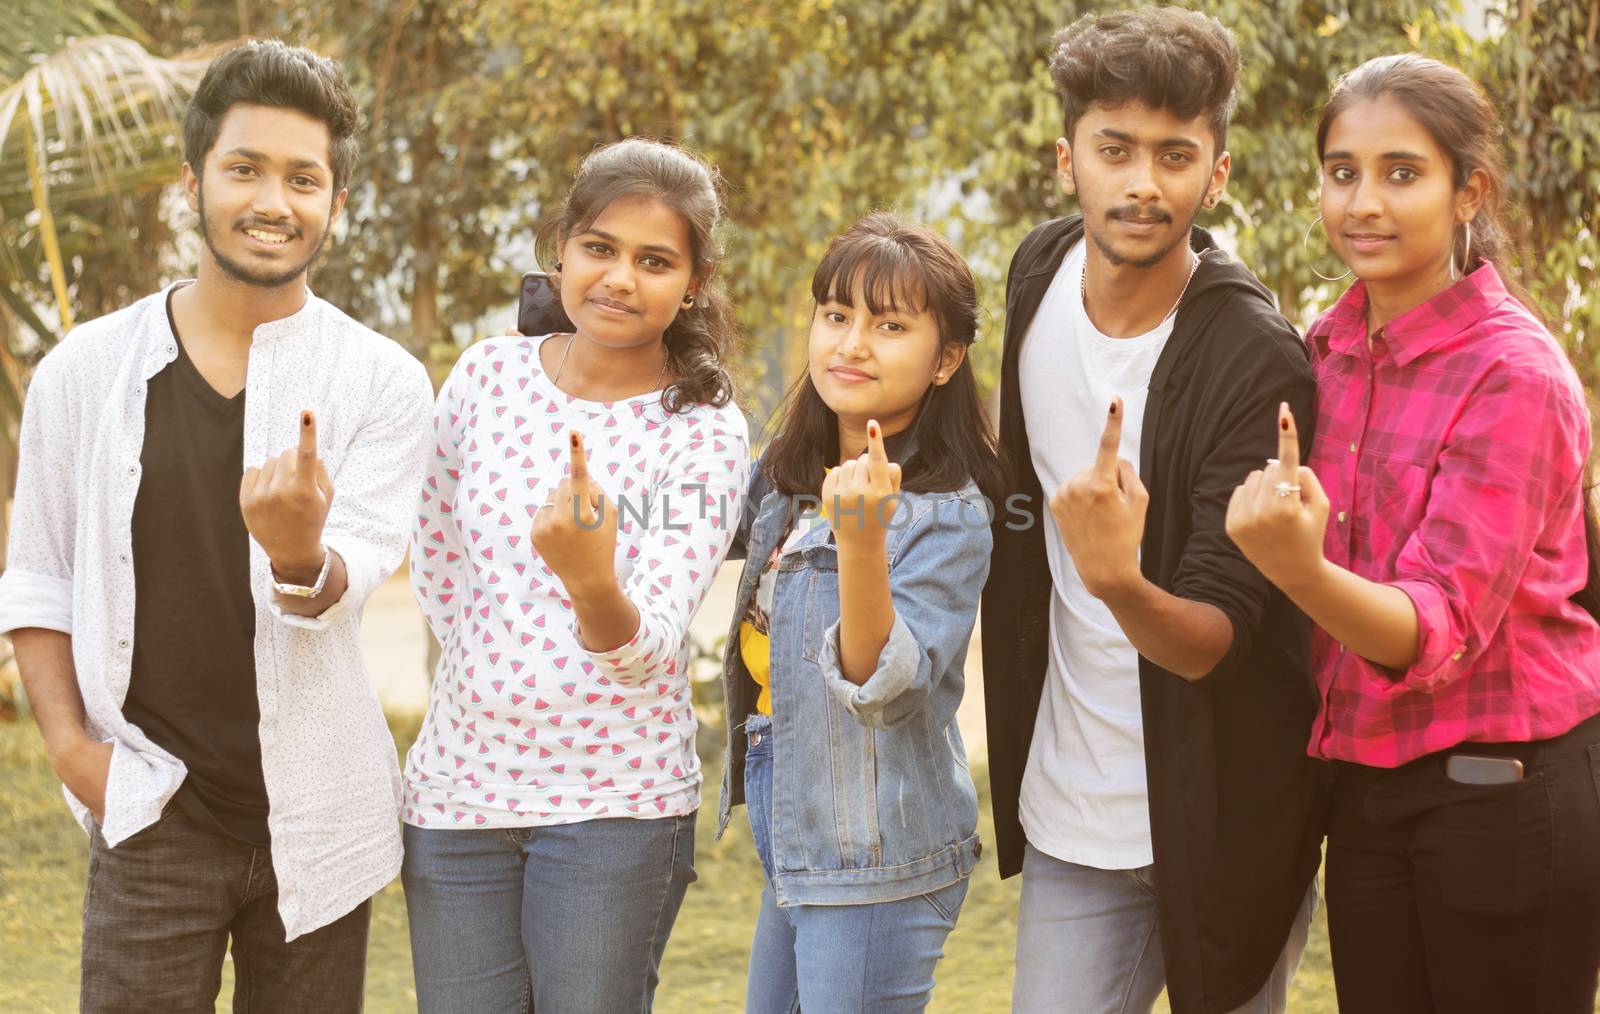 Group of teenager friends showing ink marked fingers outside polling station or booth after casting votes - Concept of Indian election or vote casting system